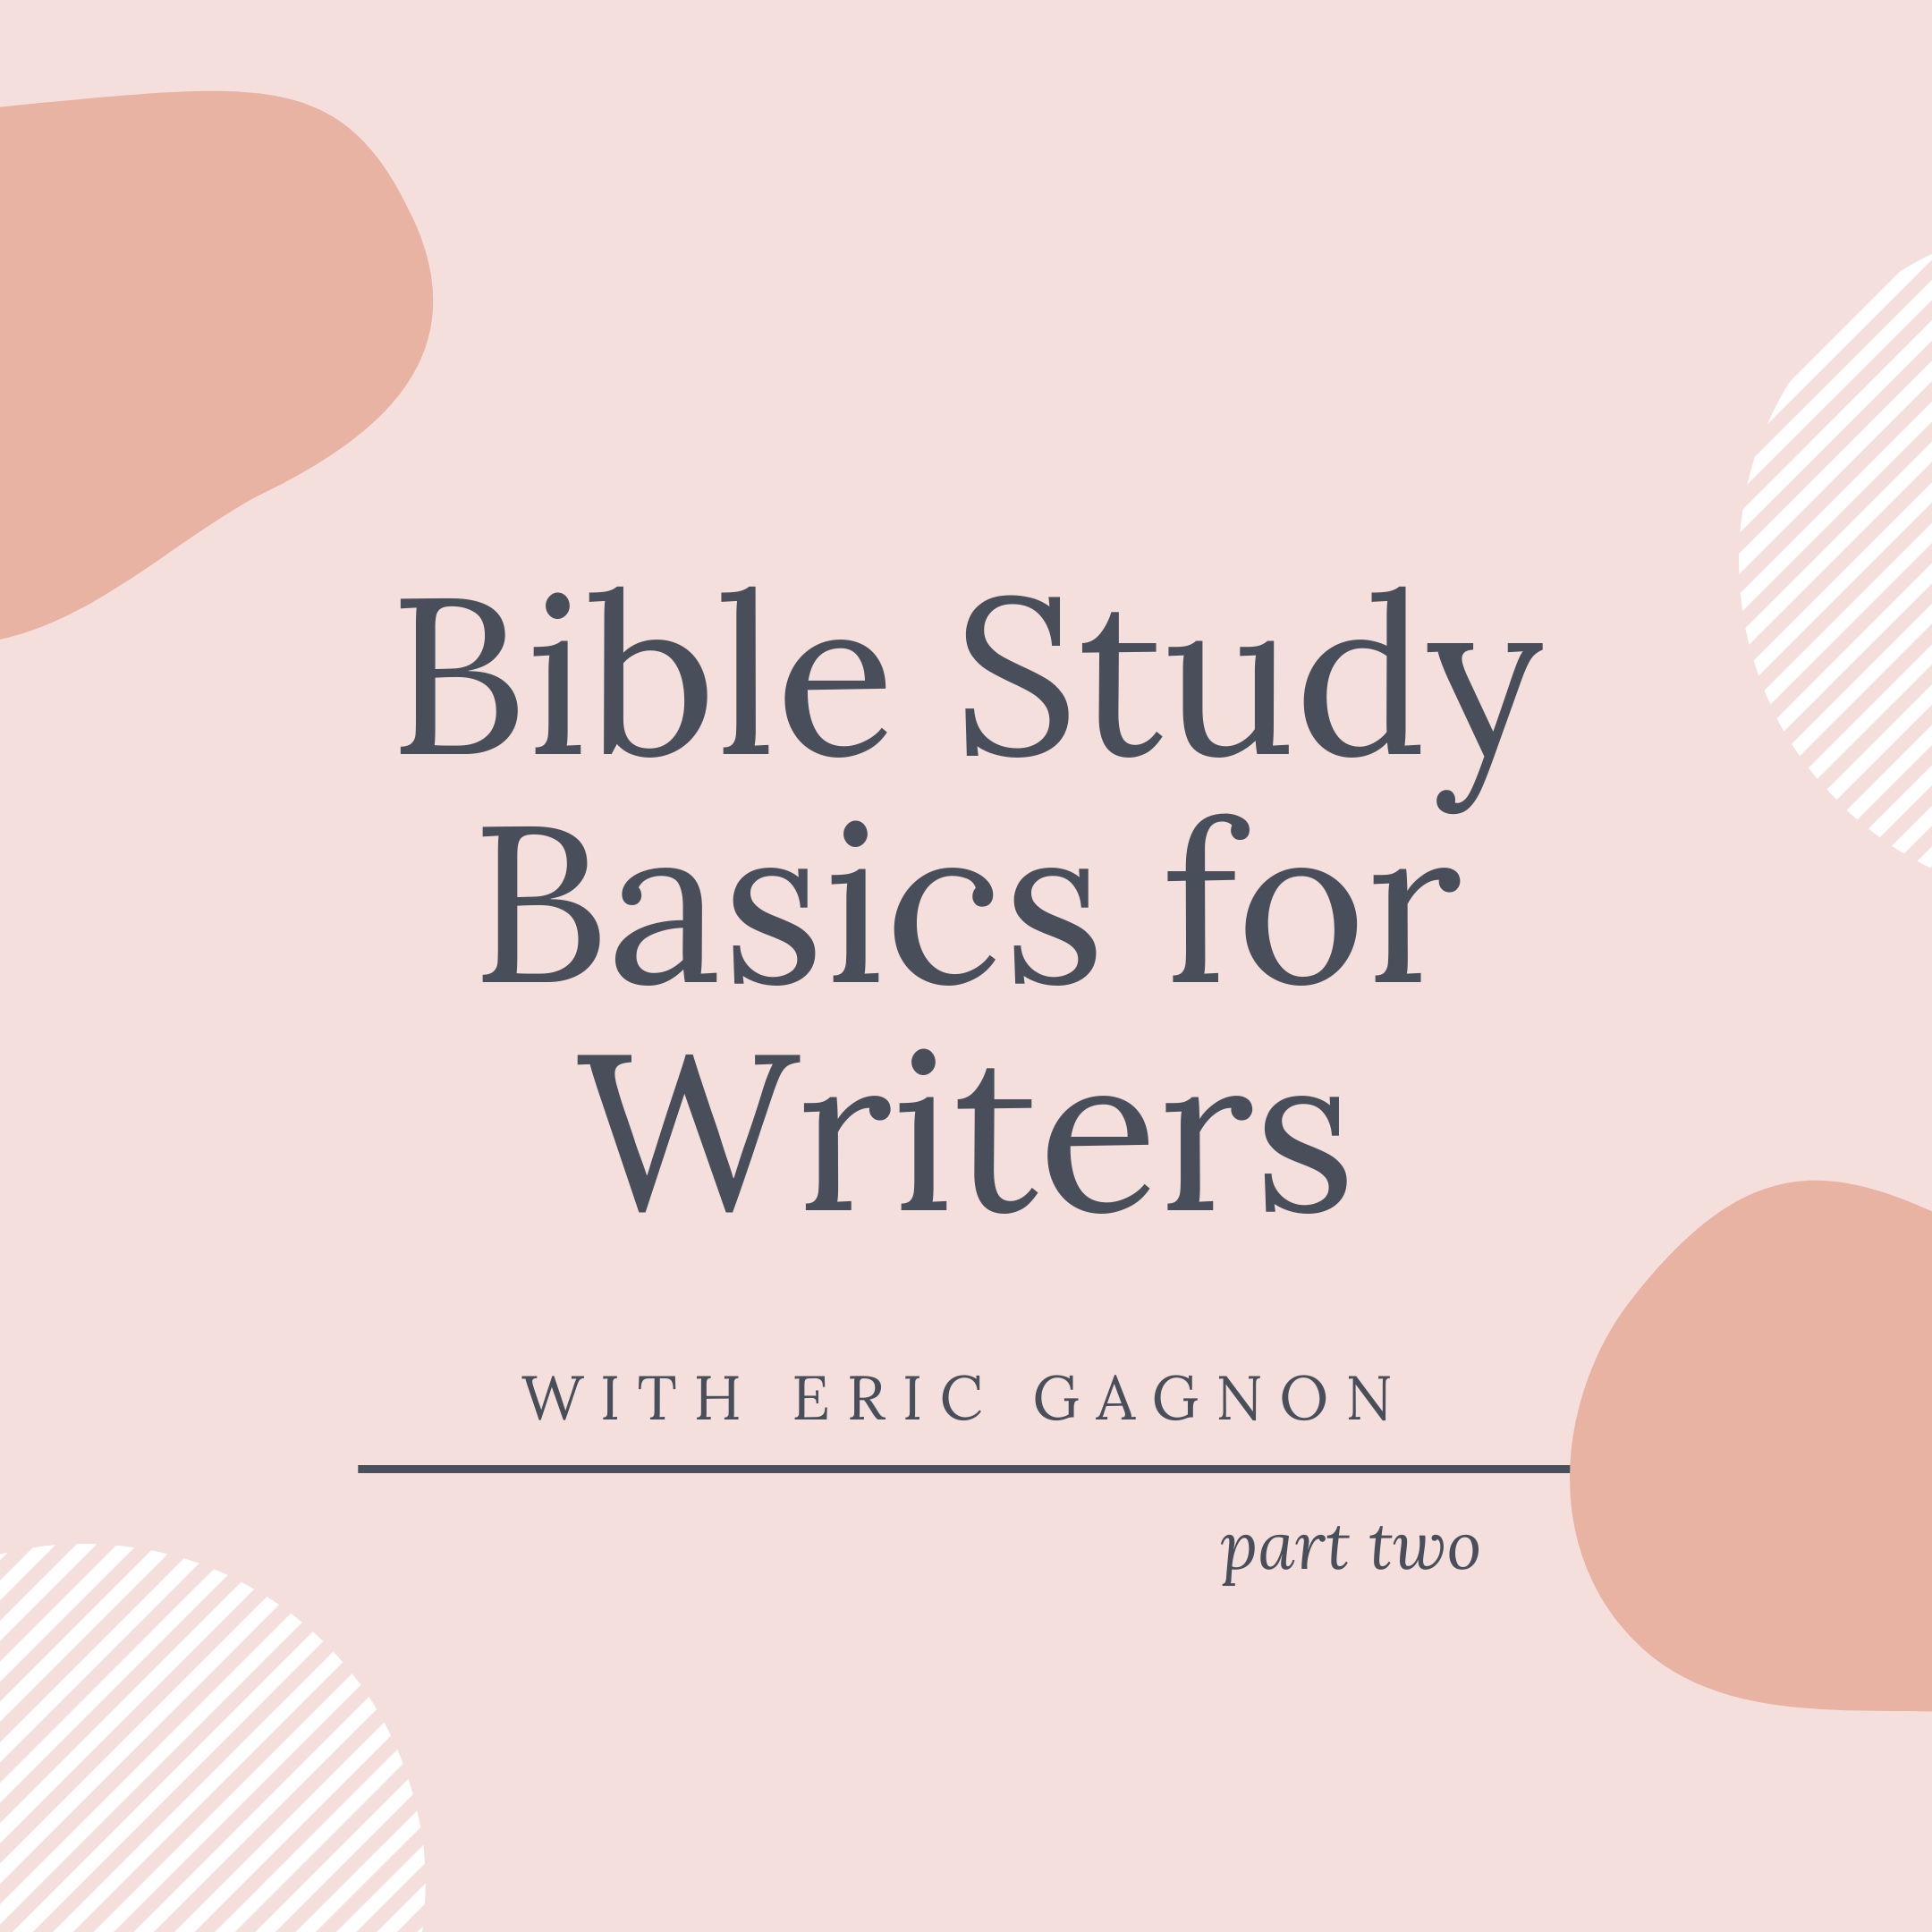 Bible Study Basics for Writers: Part Two with Eric Gagnon